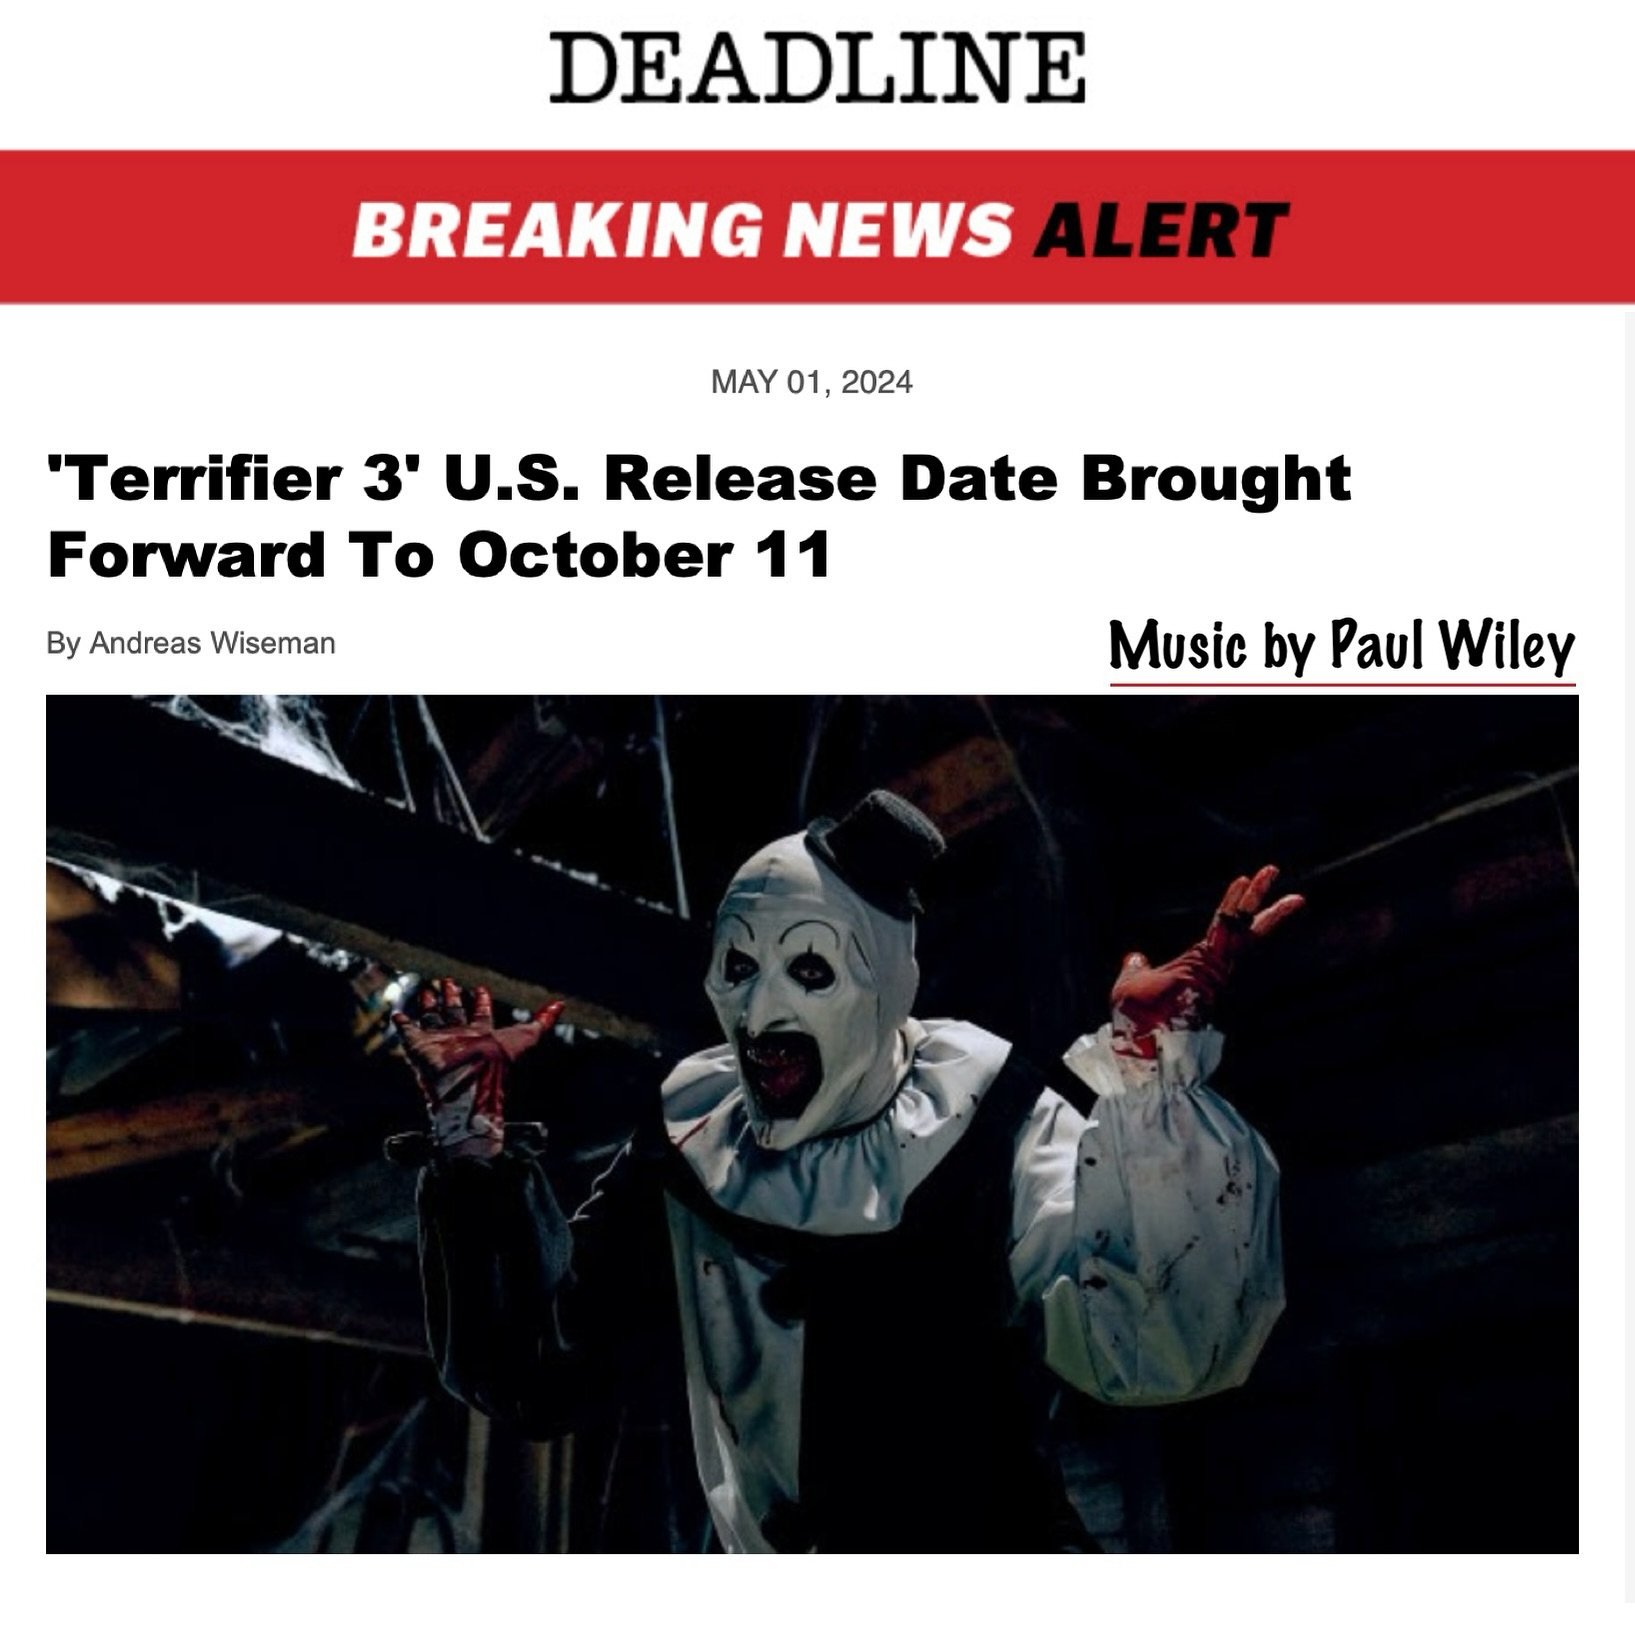 Good news to all the TERRIFIER fans out there! You&rsquo;ll get to see the 3rd installment two weeks early! Art the Clown is back Oct. 11th with his bag full of jolly tricks. Scoring duties again go to our rock star client, @paulwileymusic.
*
@deadli